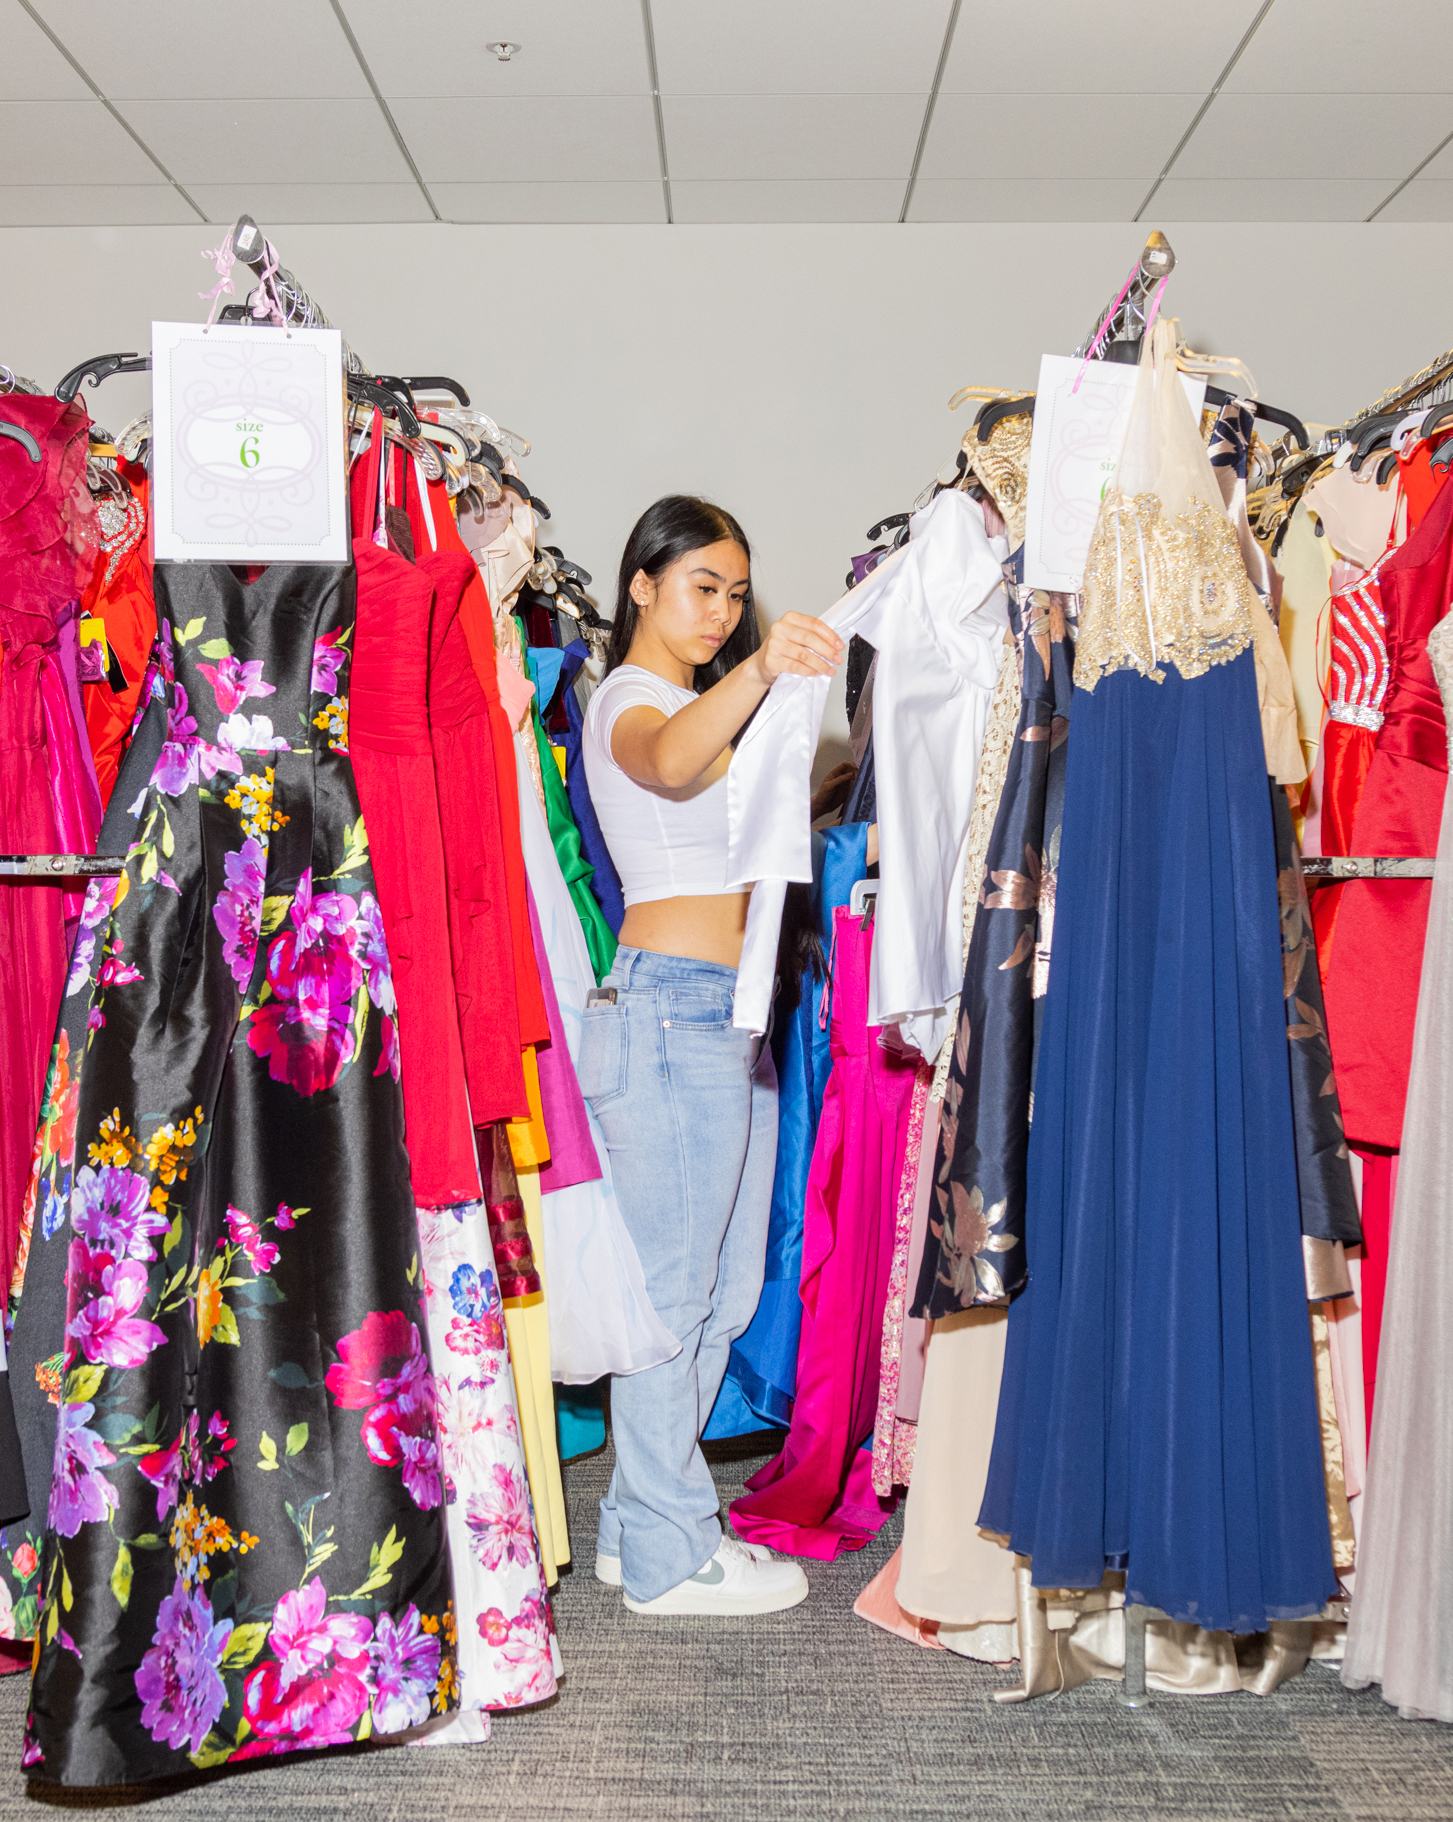 A woman browses through racks of colorful dresses, holding a white garment.